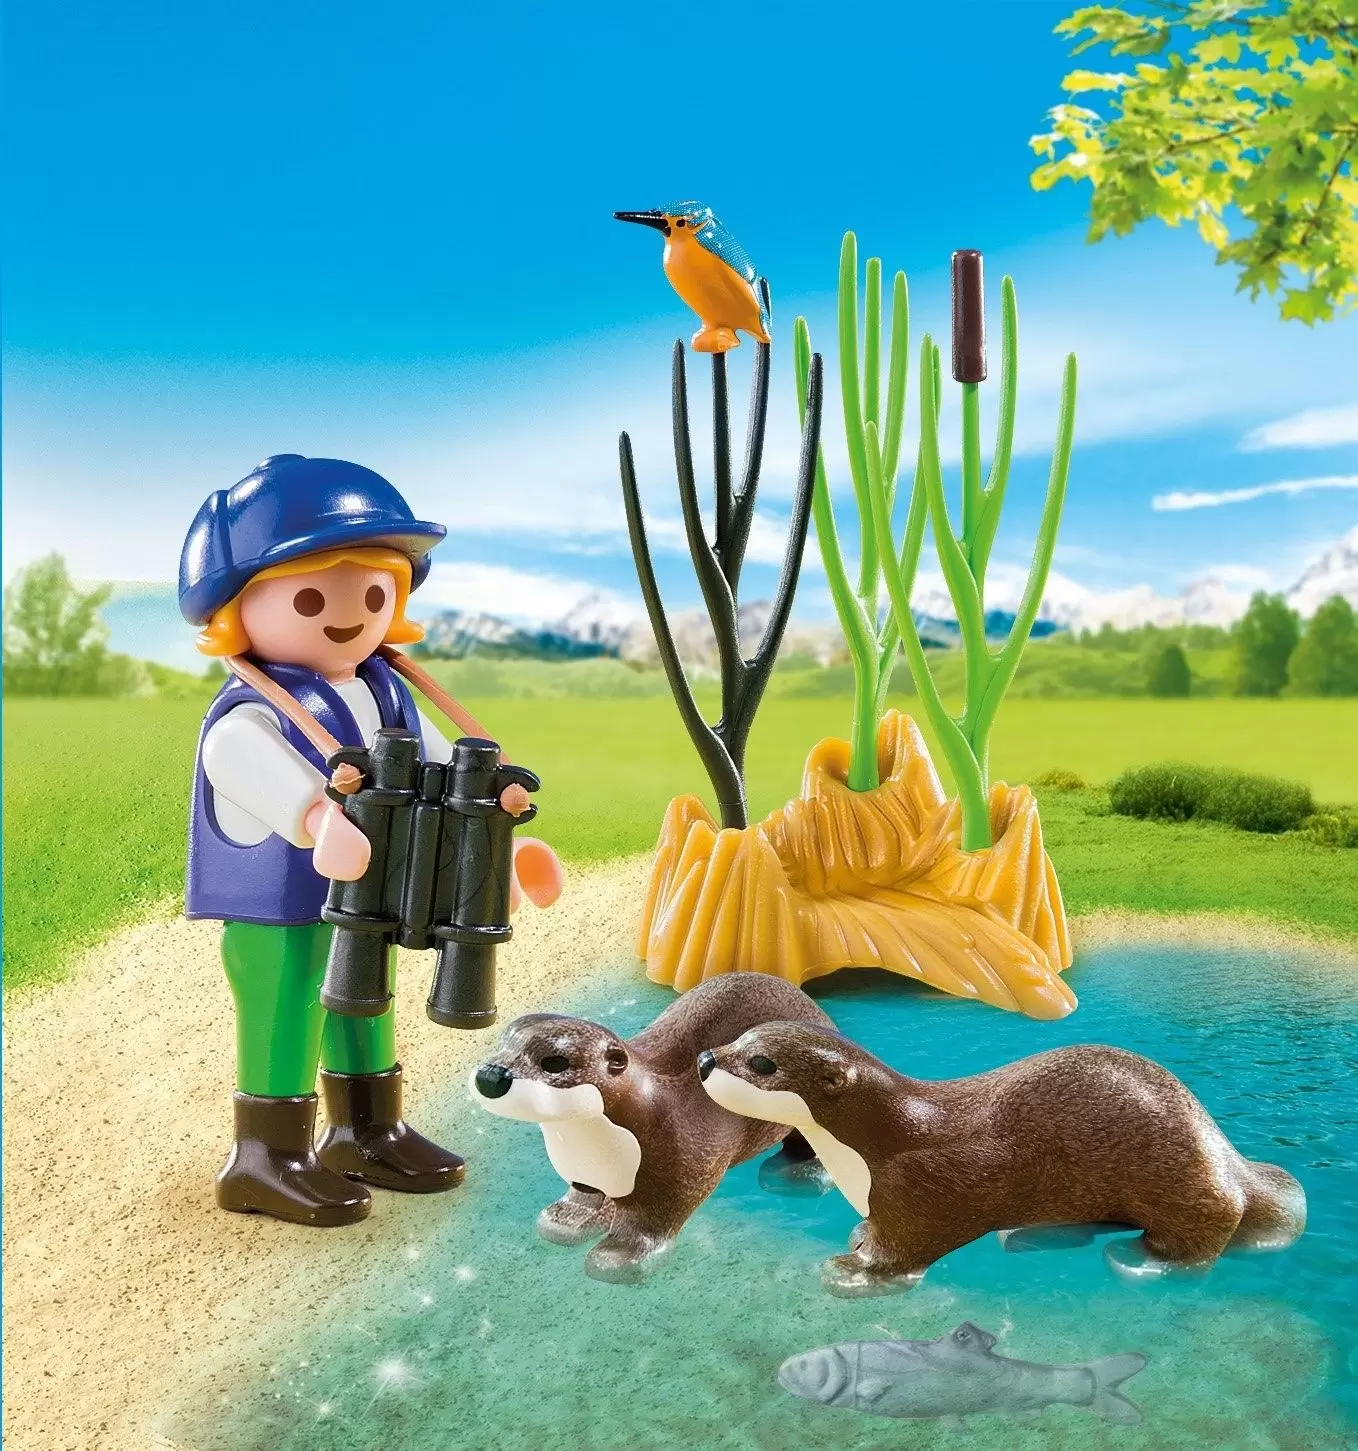 Playmobil SpecialPlus - Young Explorer with Otters